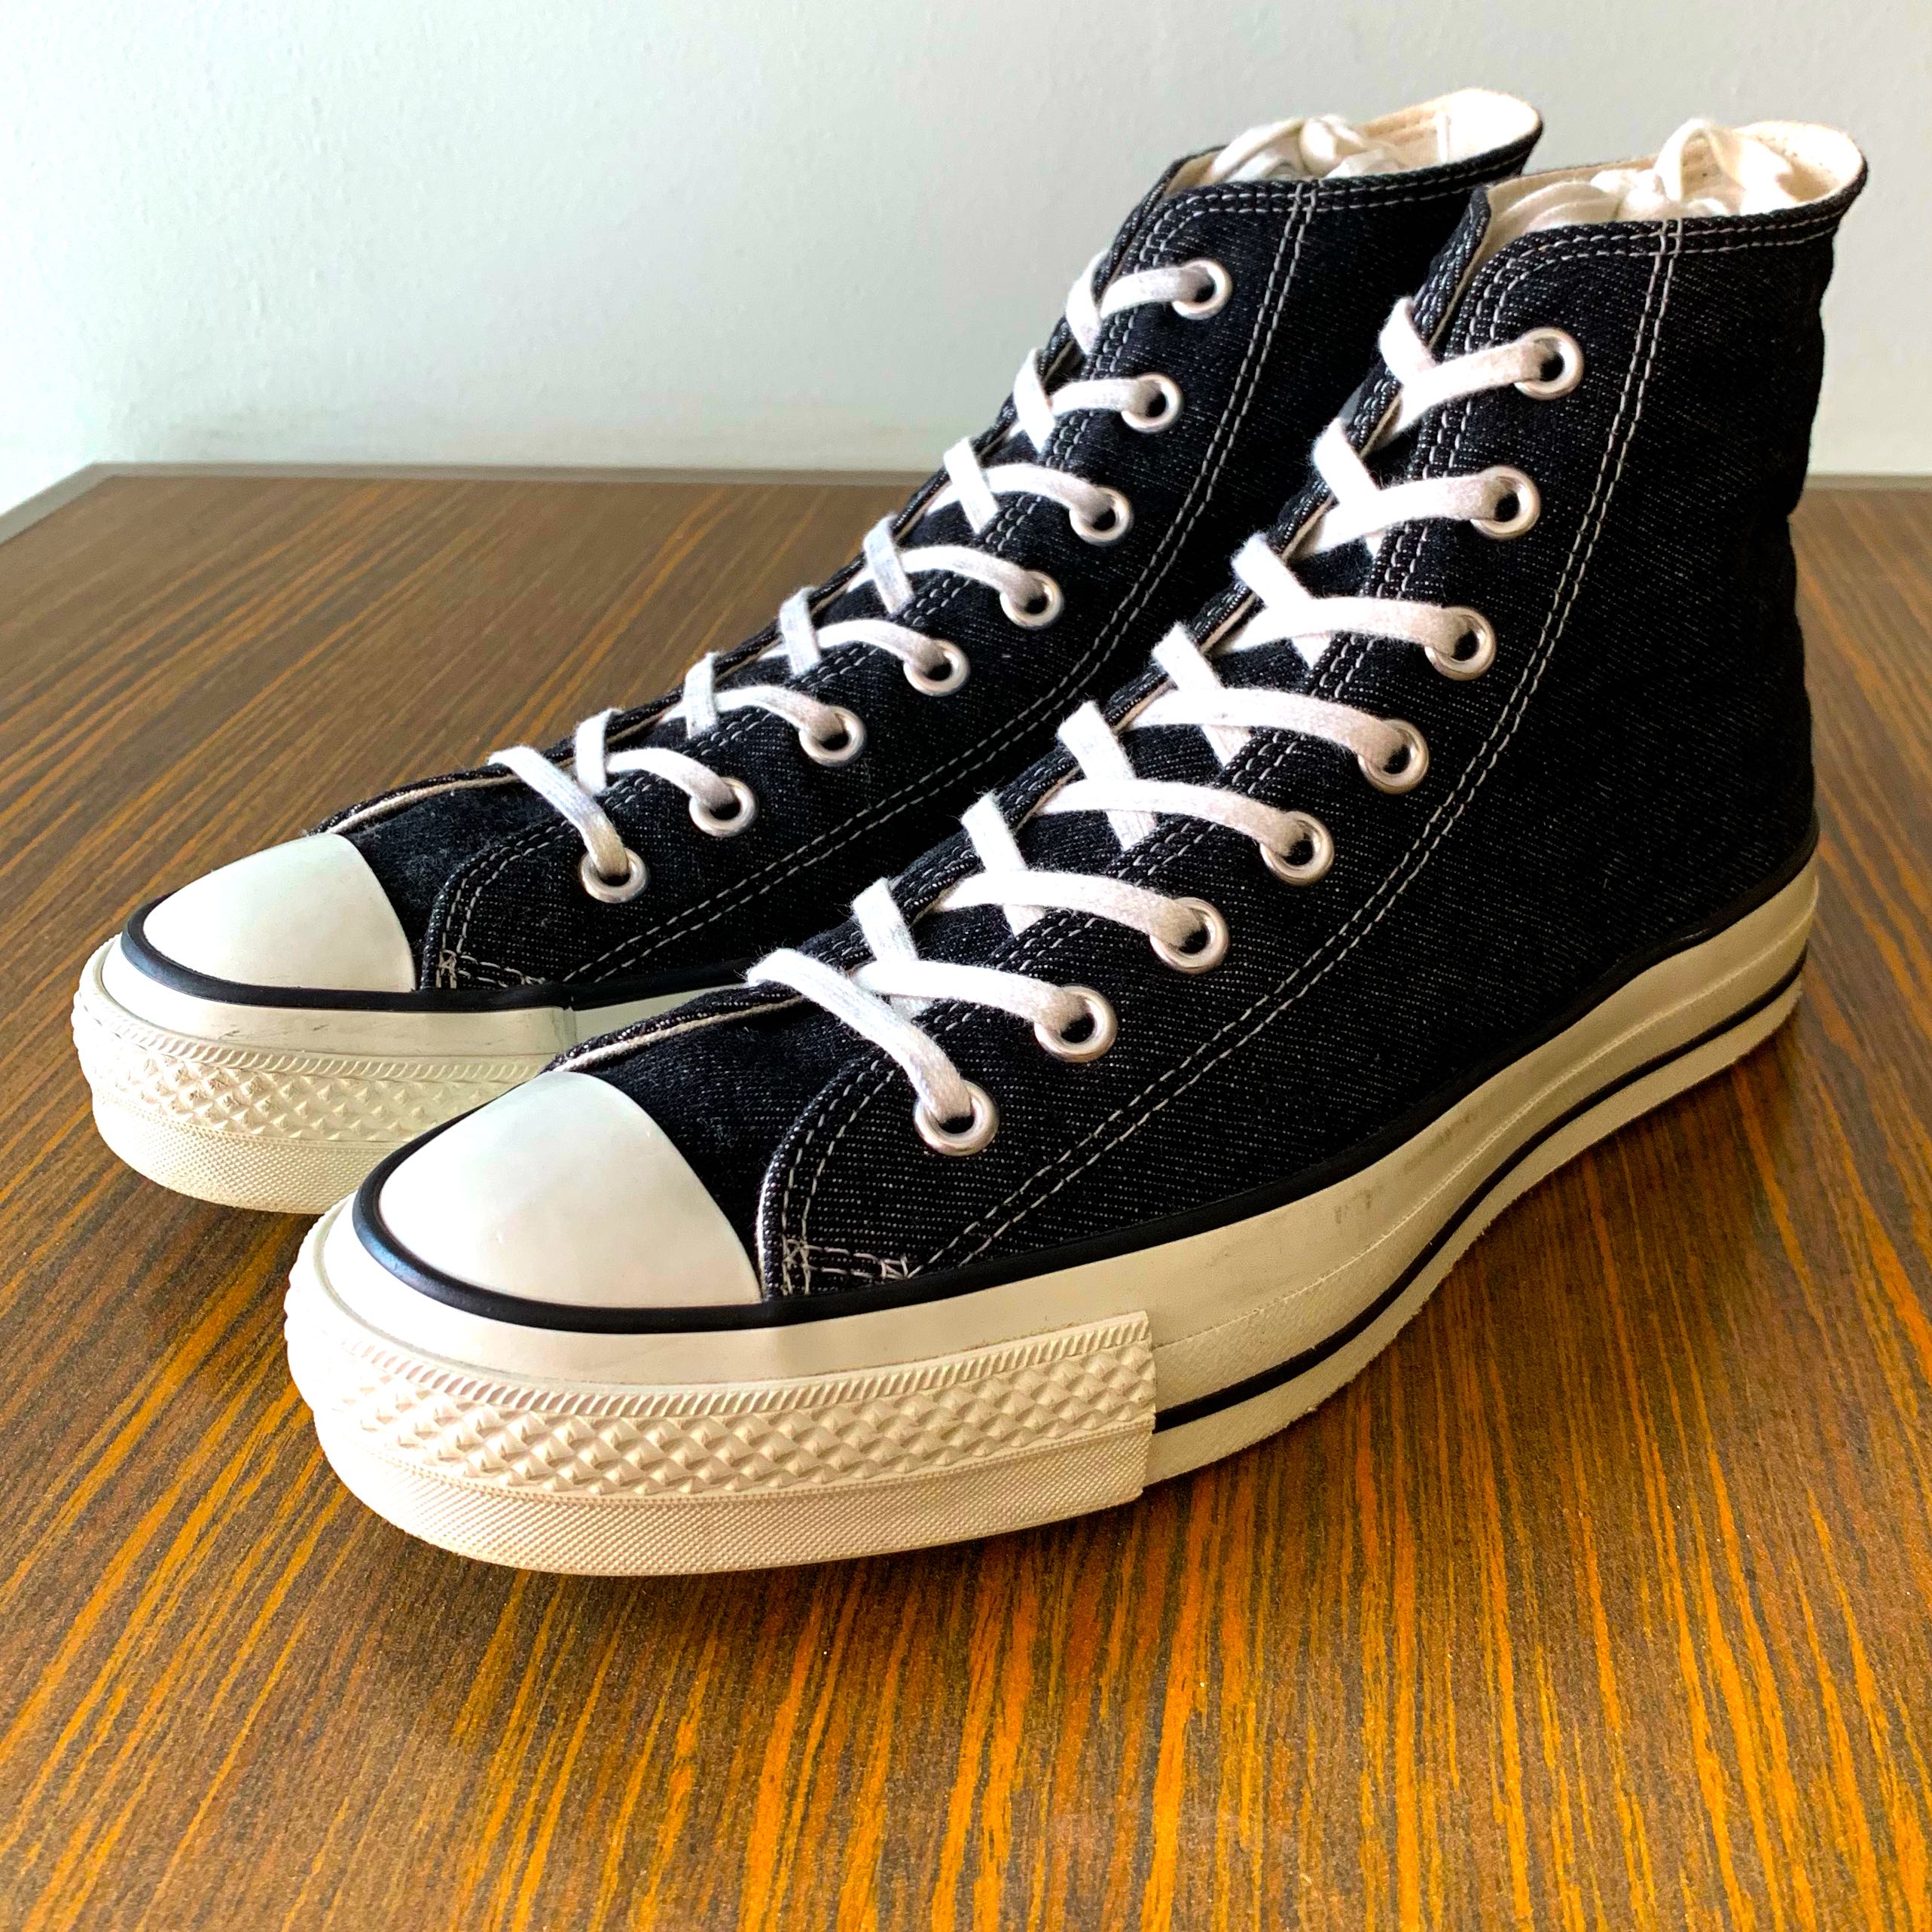 converse all star hi made in japan